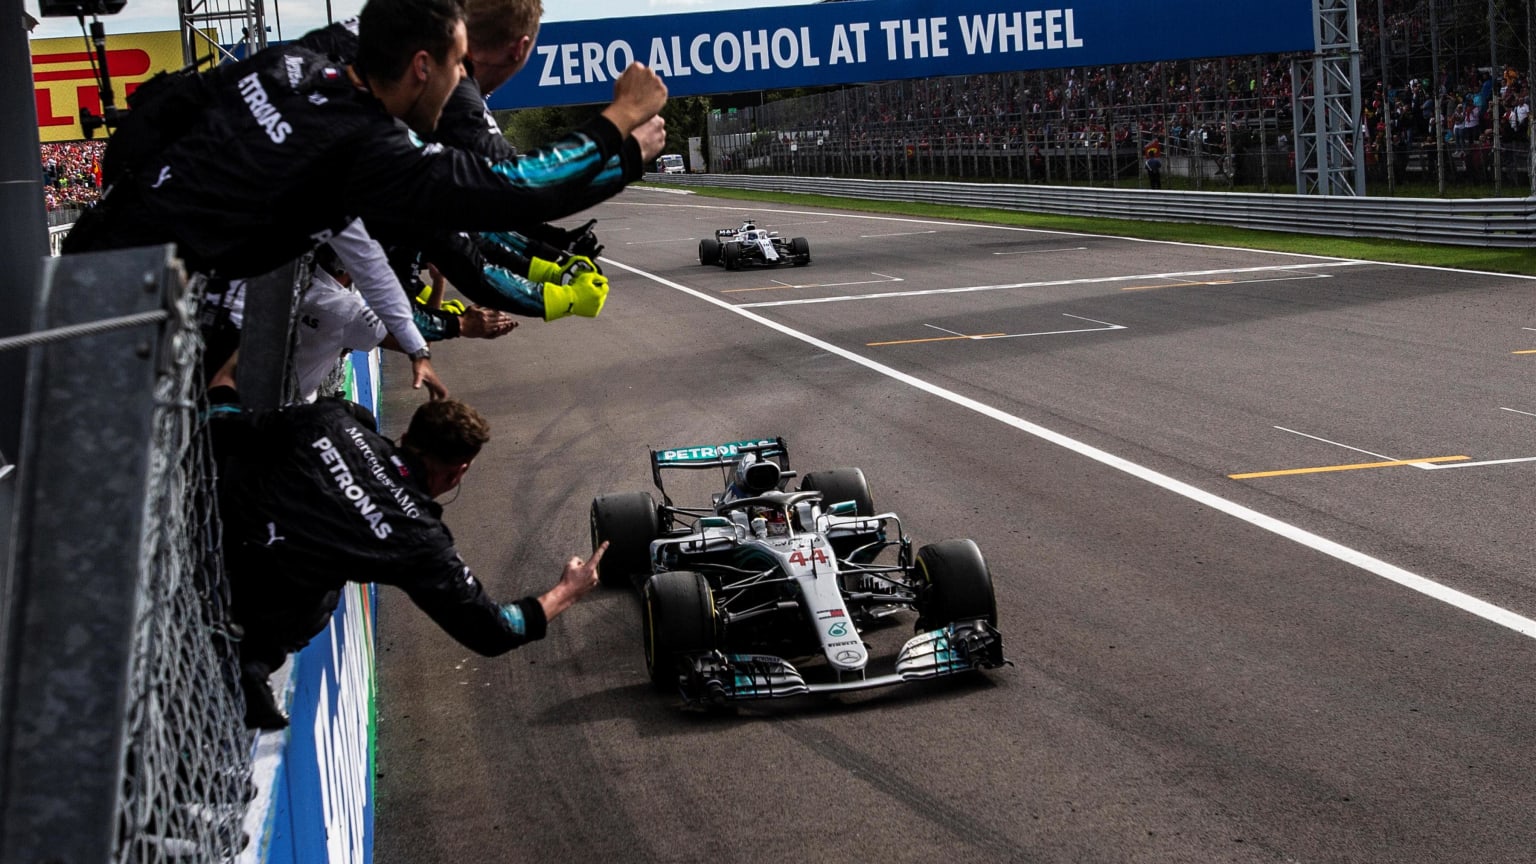 Italian Grand Prix 2015: Winners and Losers from Monza Race